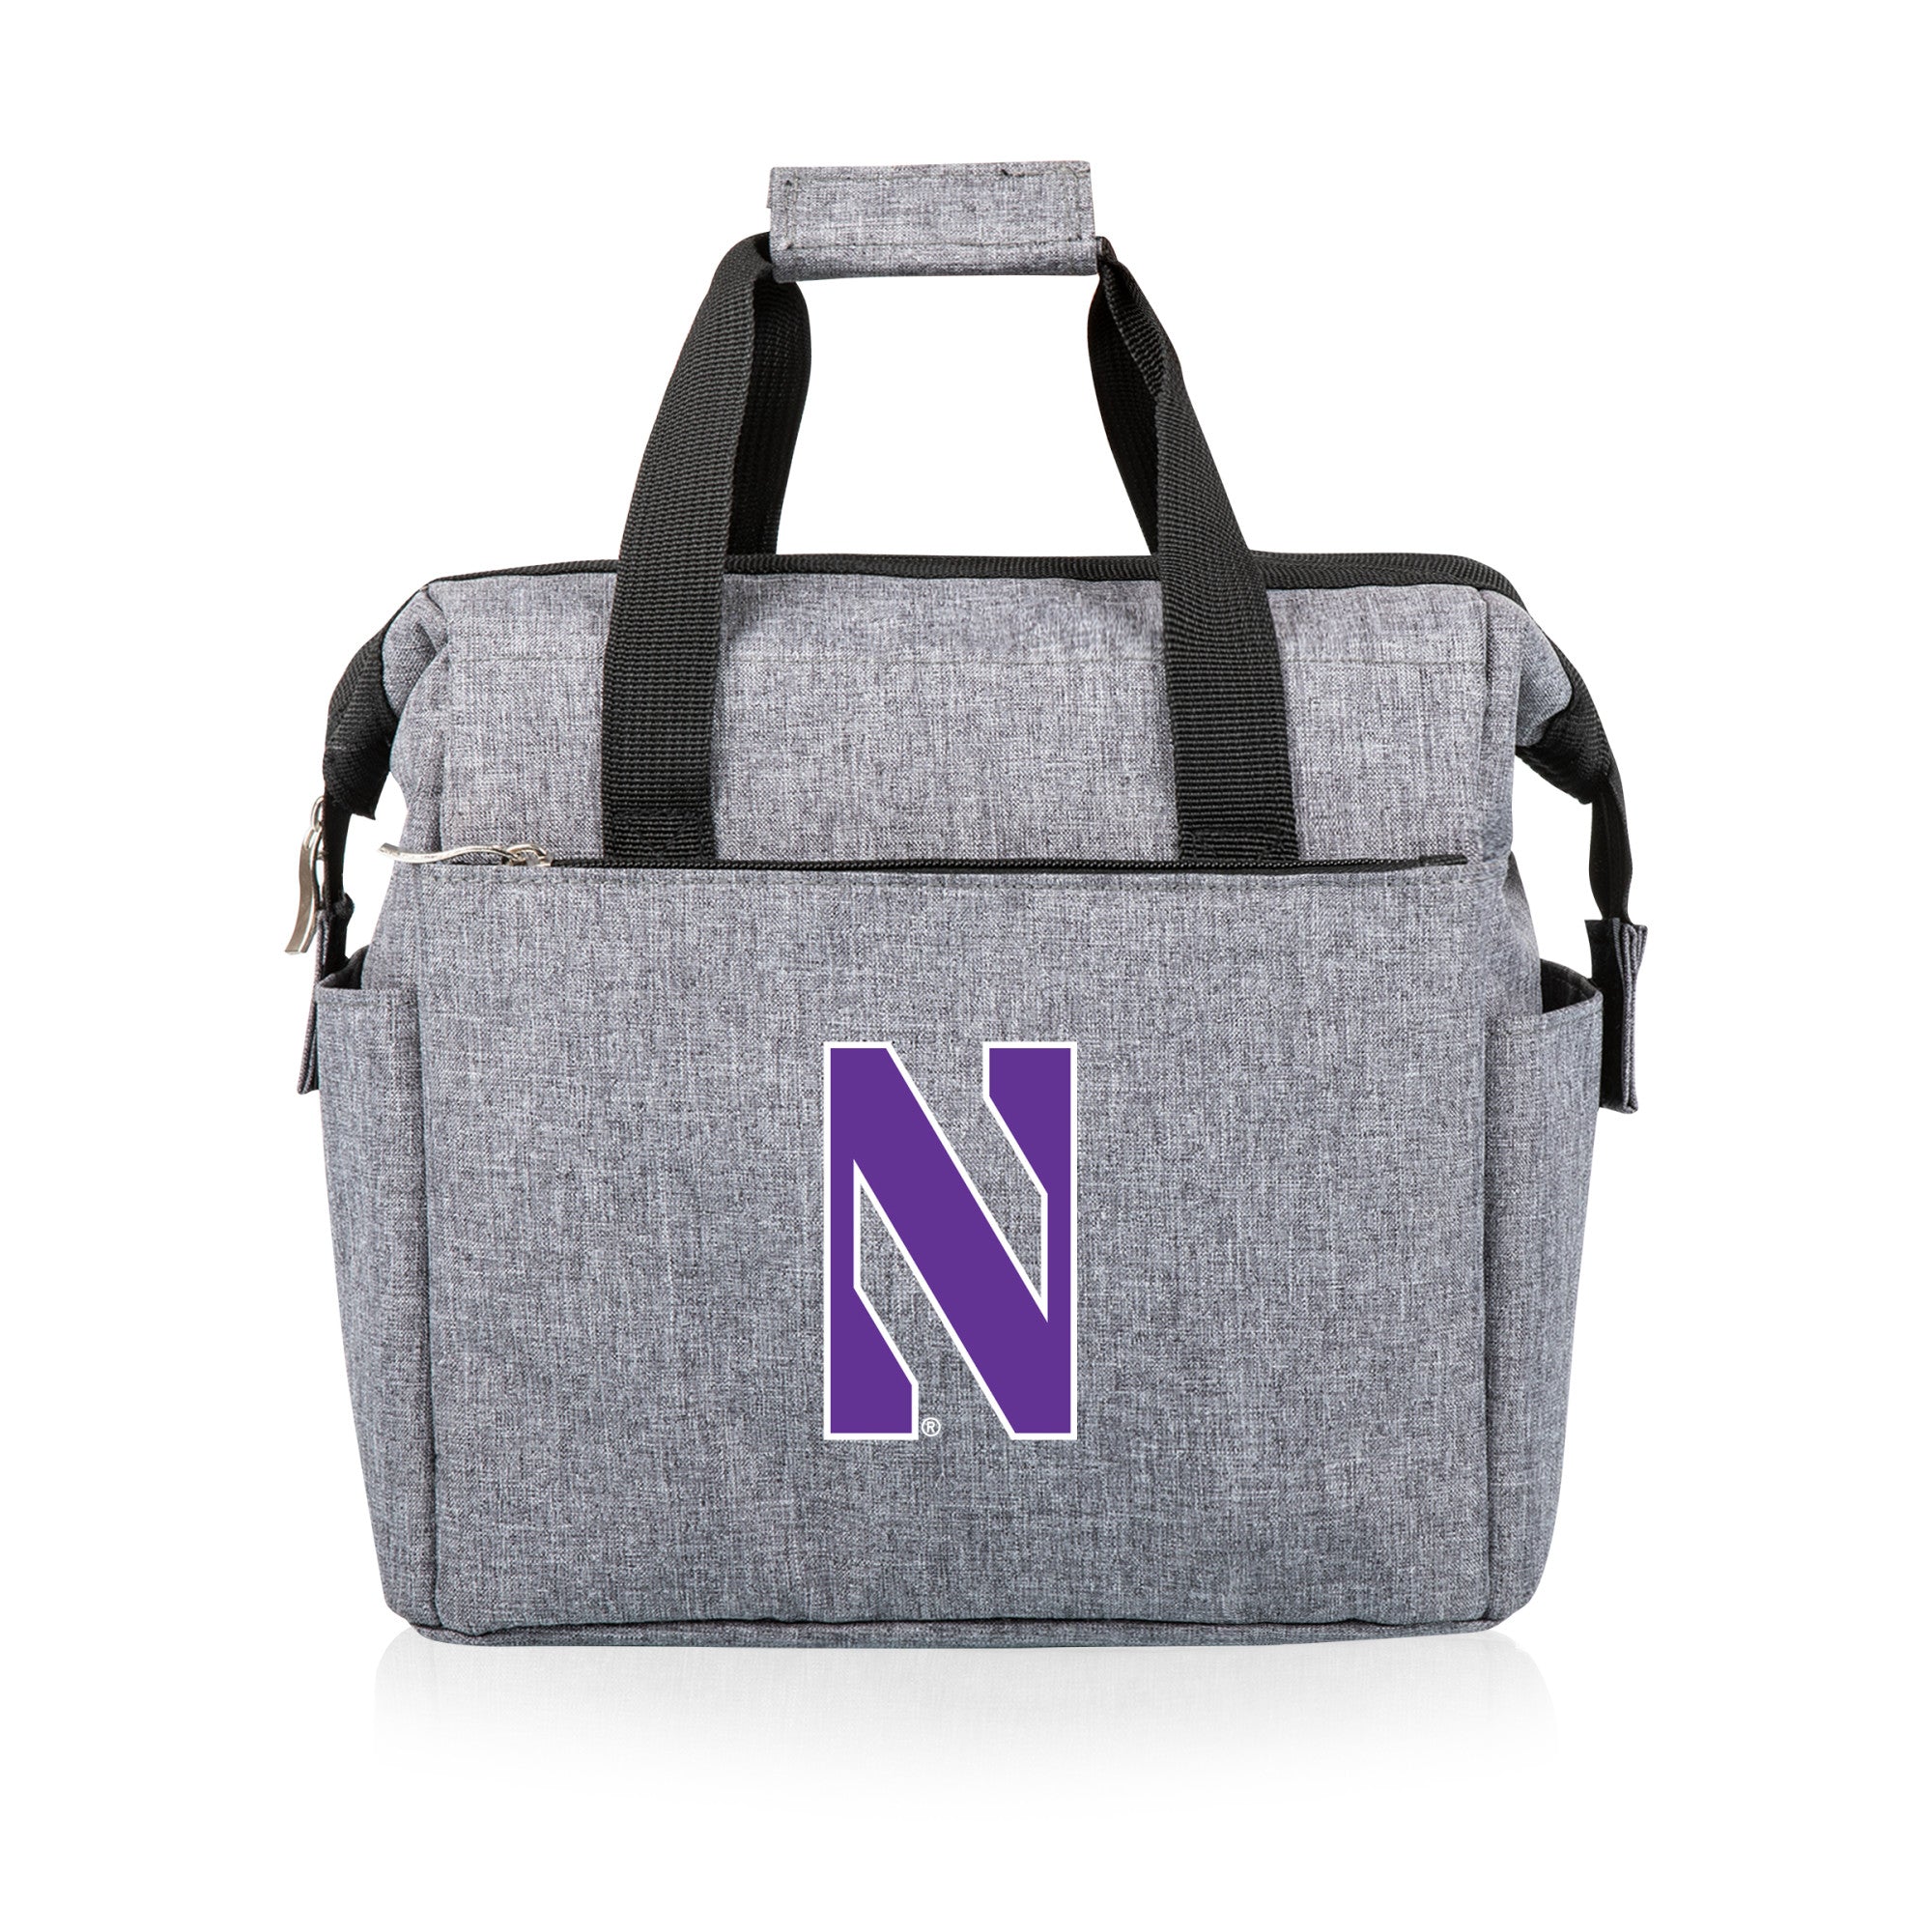 Northwestern Wildcats - On The Go Lunch Bag Cooler